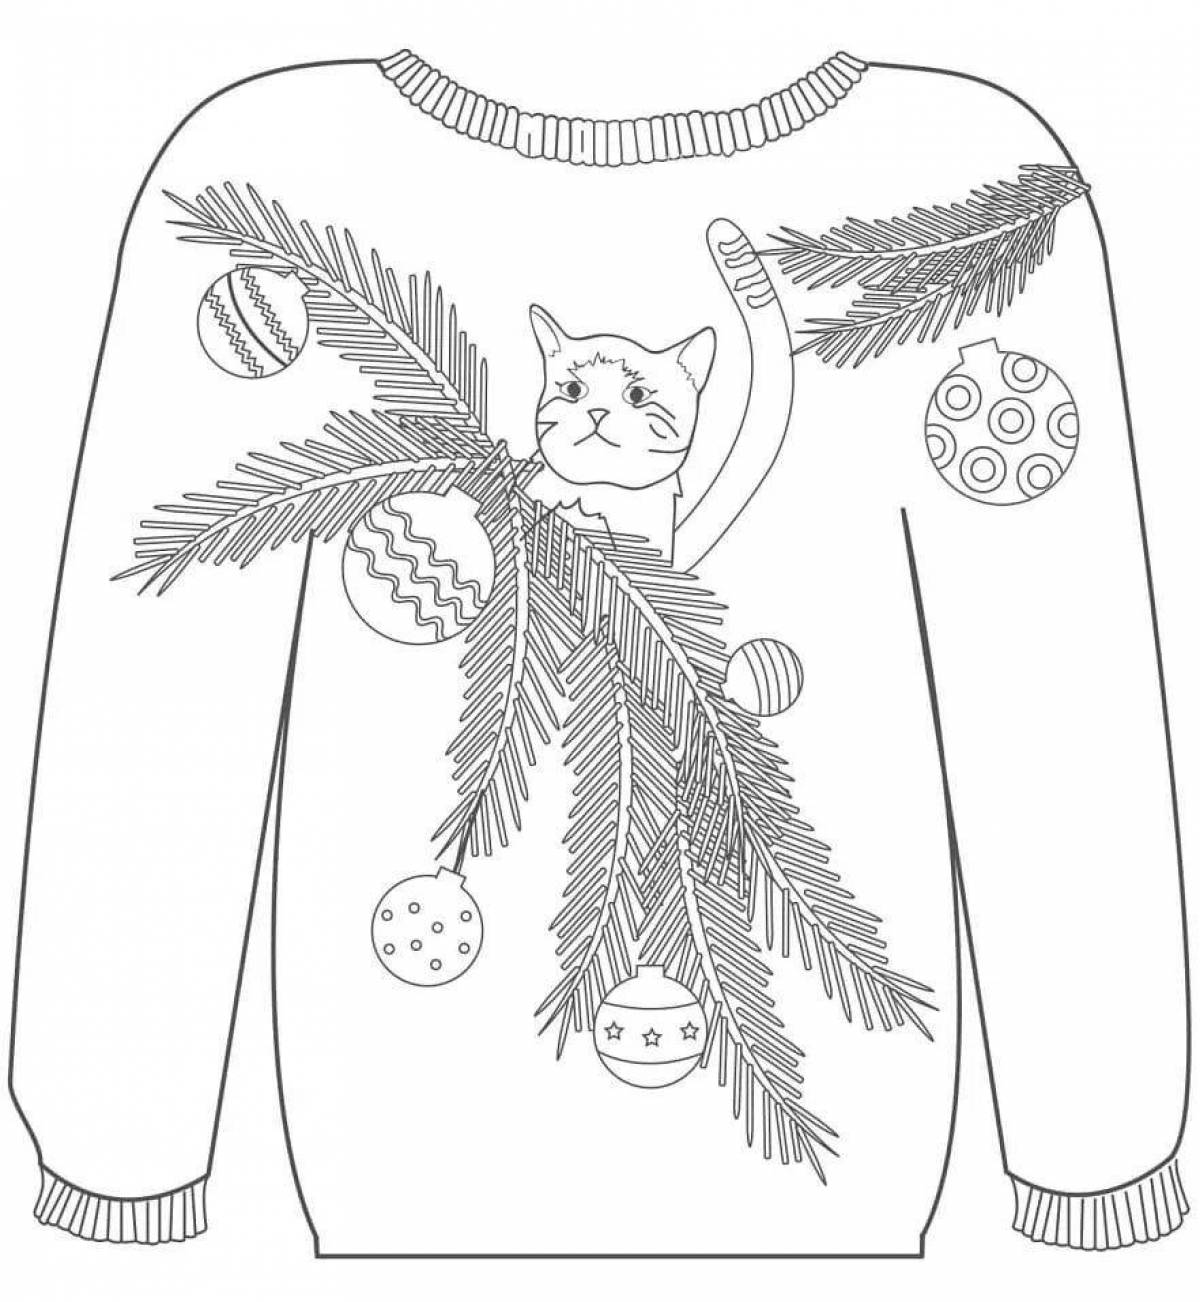 Christmas sweater coloring page